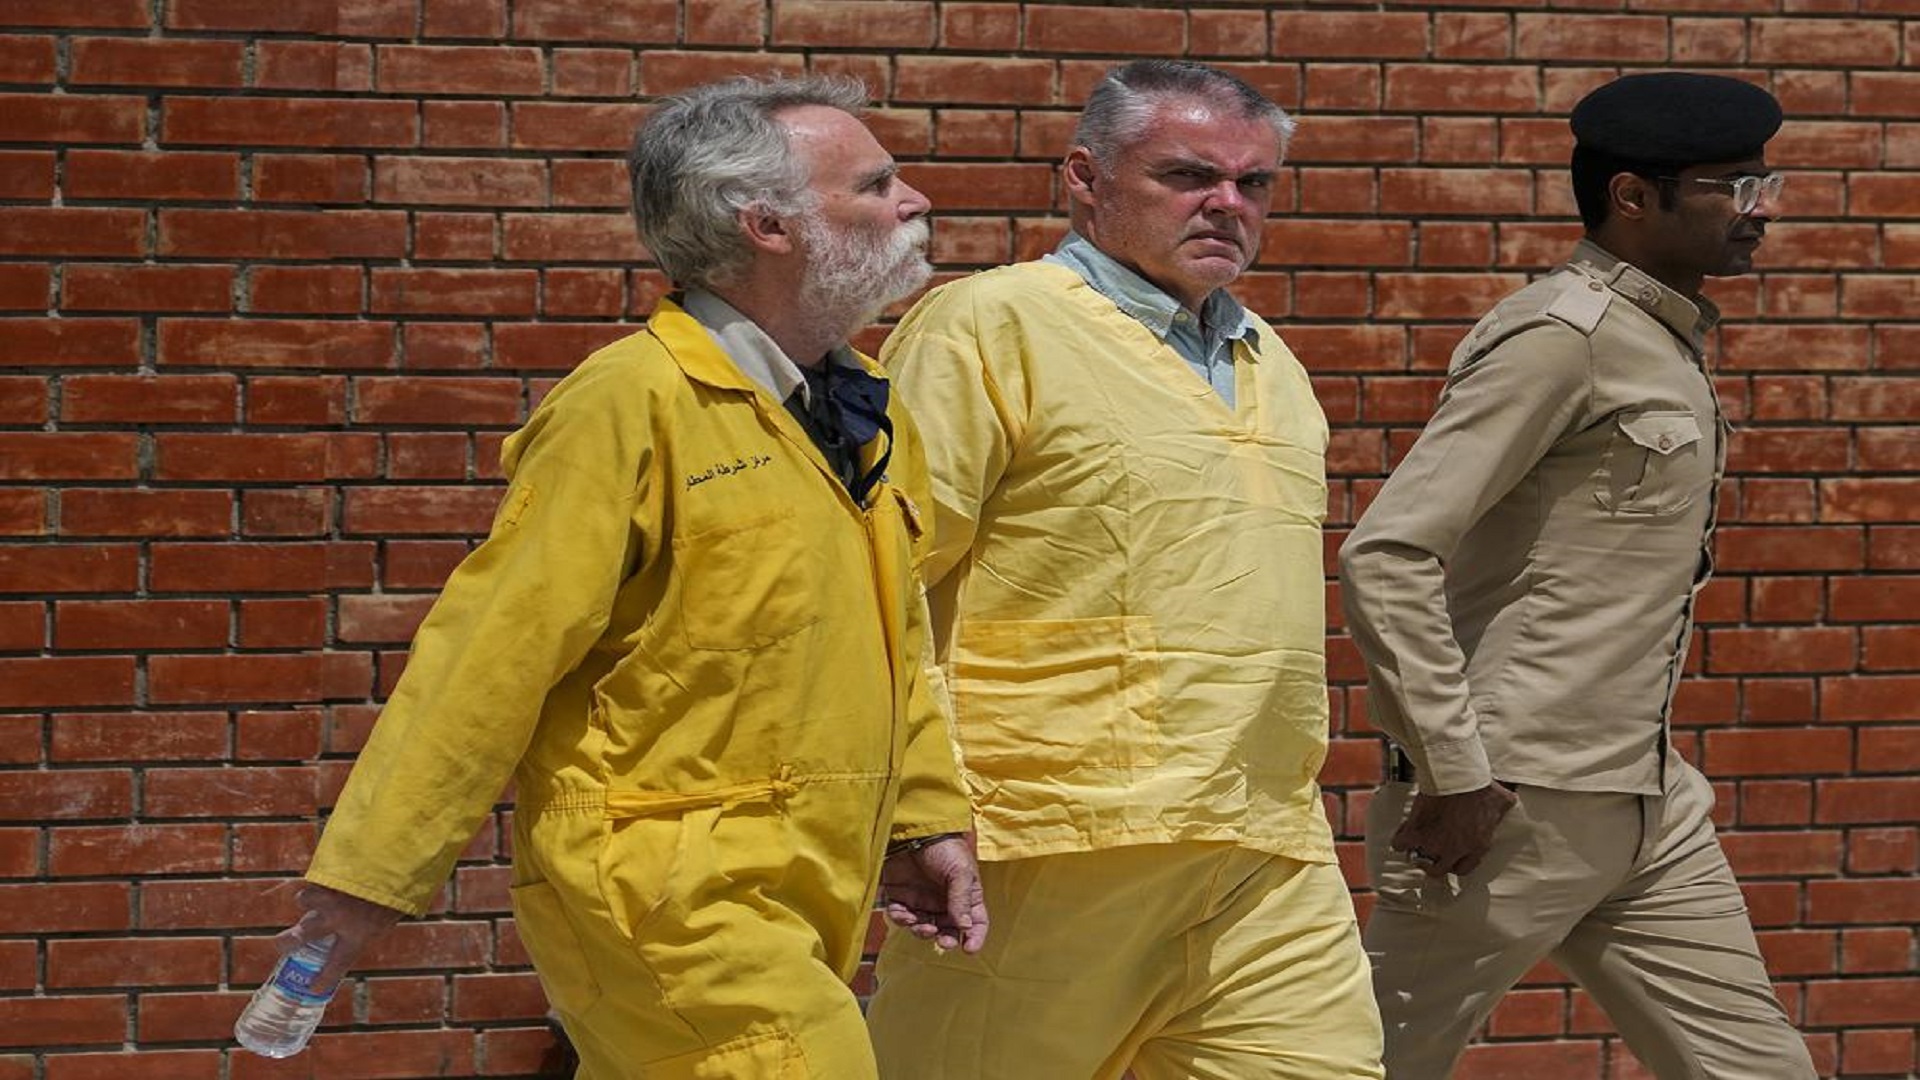 Jim Fitton of Britain, left, and Volker Waldman of Germany, center, wearing yellow detainees' uniforms and handcuffed, are escorted by Iraqi security forces, outside a courtroom, in Baghdad, Iraq, on May 22, 2022. (AP Photo/Hadi Mizban, File)